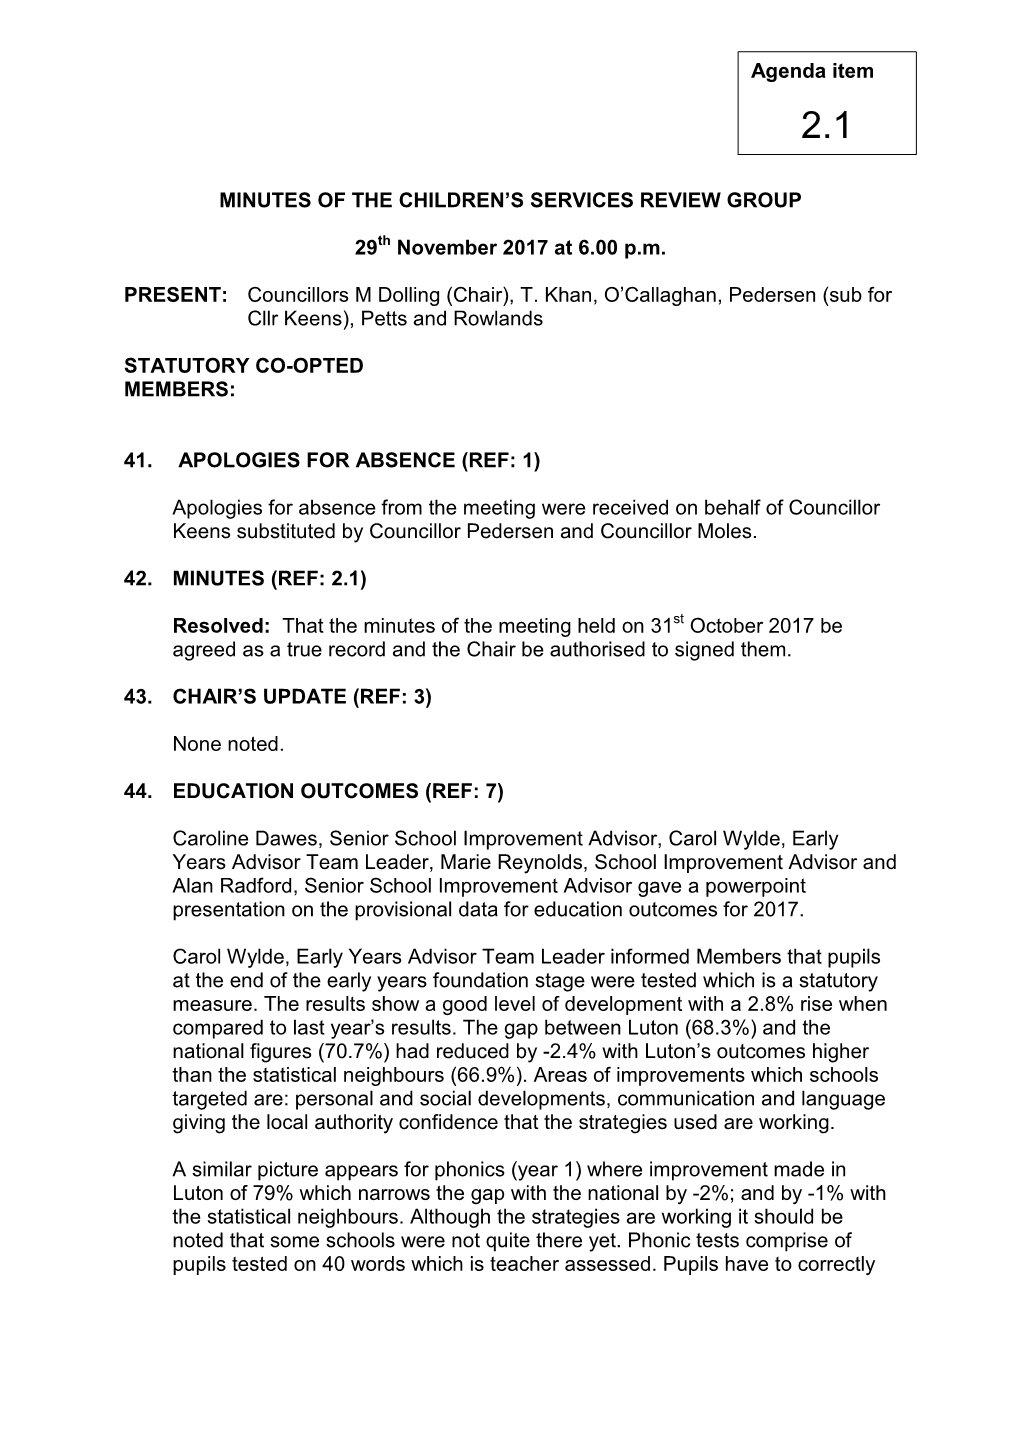 MINUTES of the CHILDREN's SERVICES REVIEW GROUP 29 November 2017 at 6.00 P.M. PRESENT: Councillors M Dolling (Chair), T. Khan